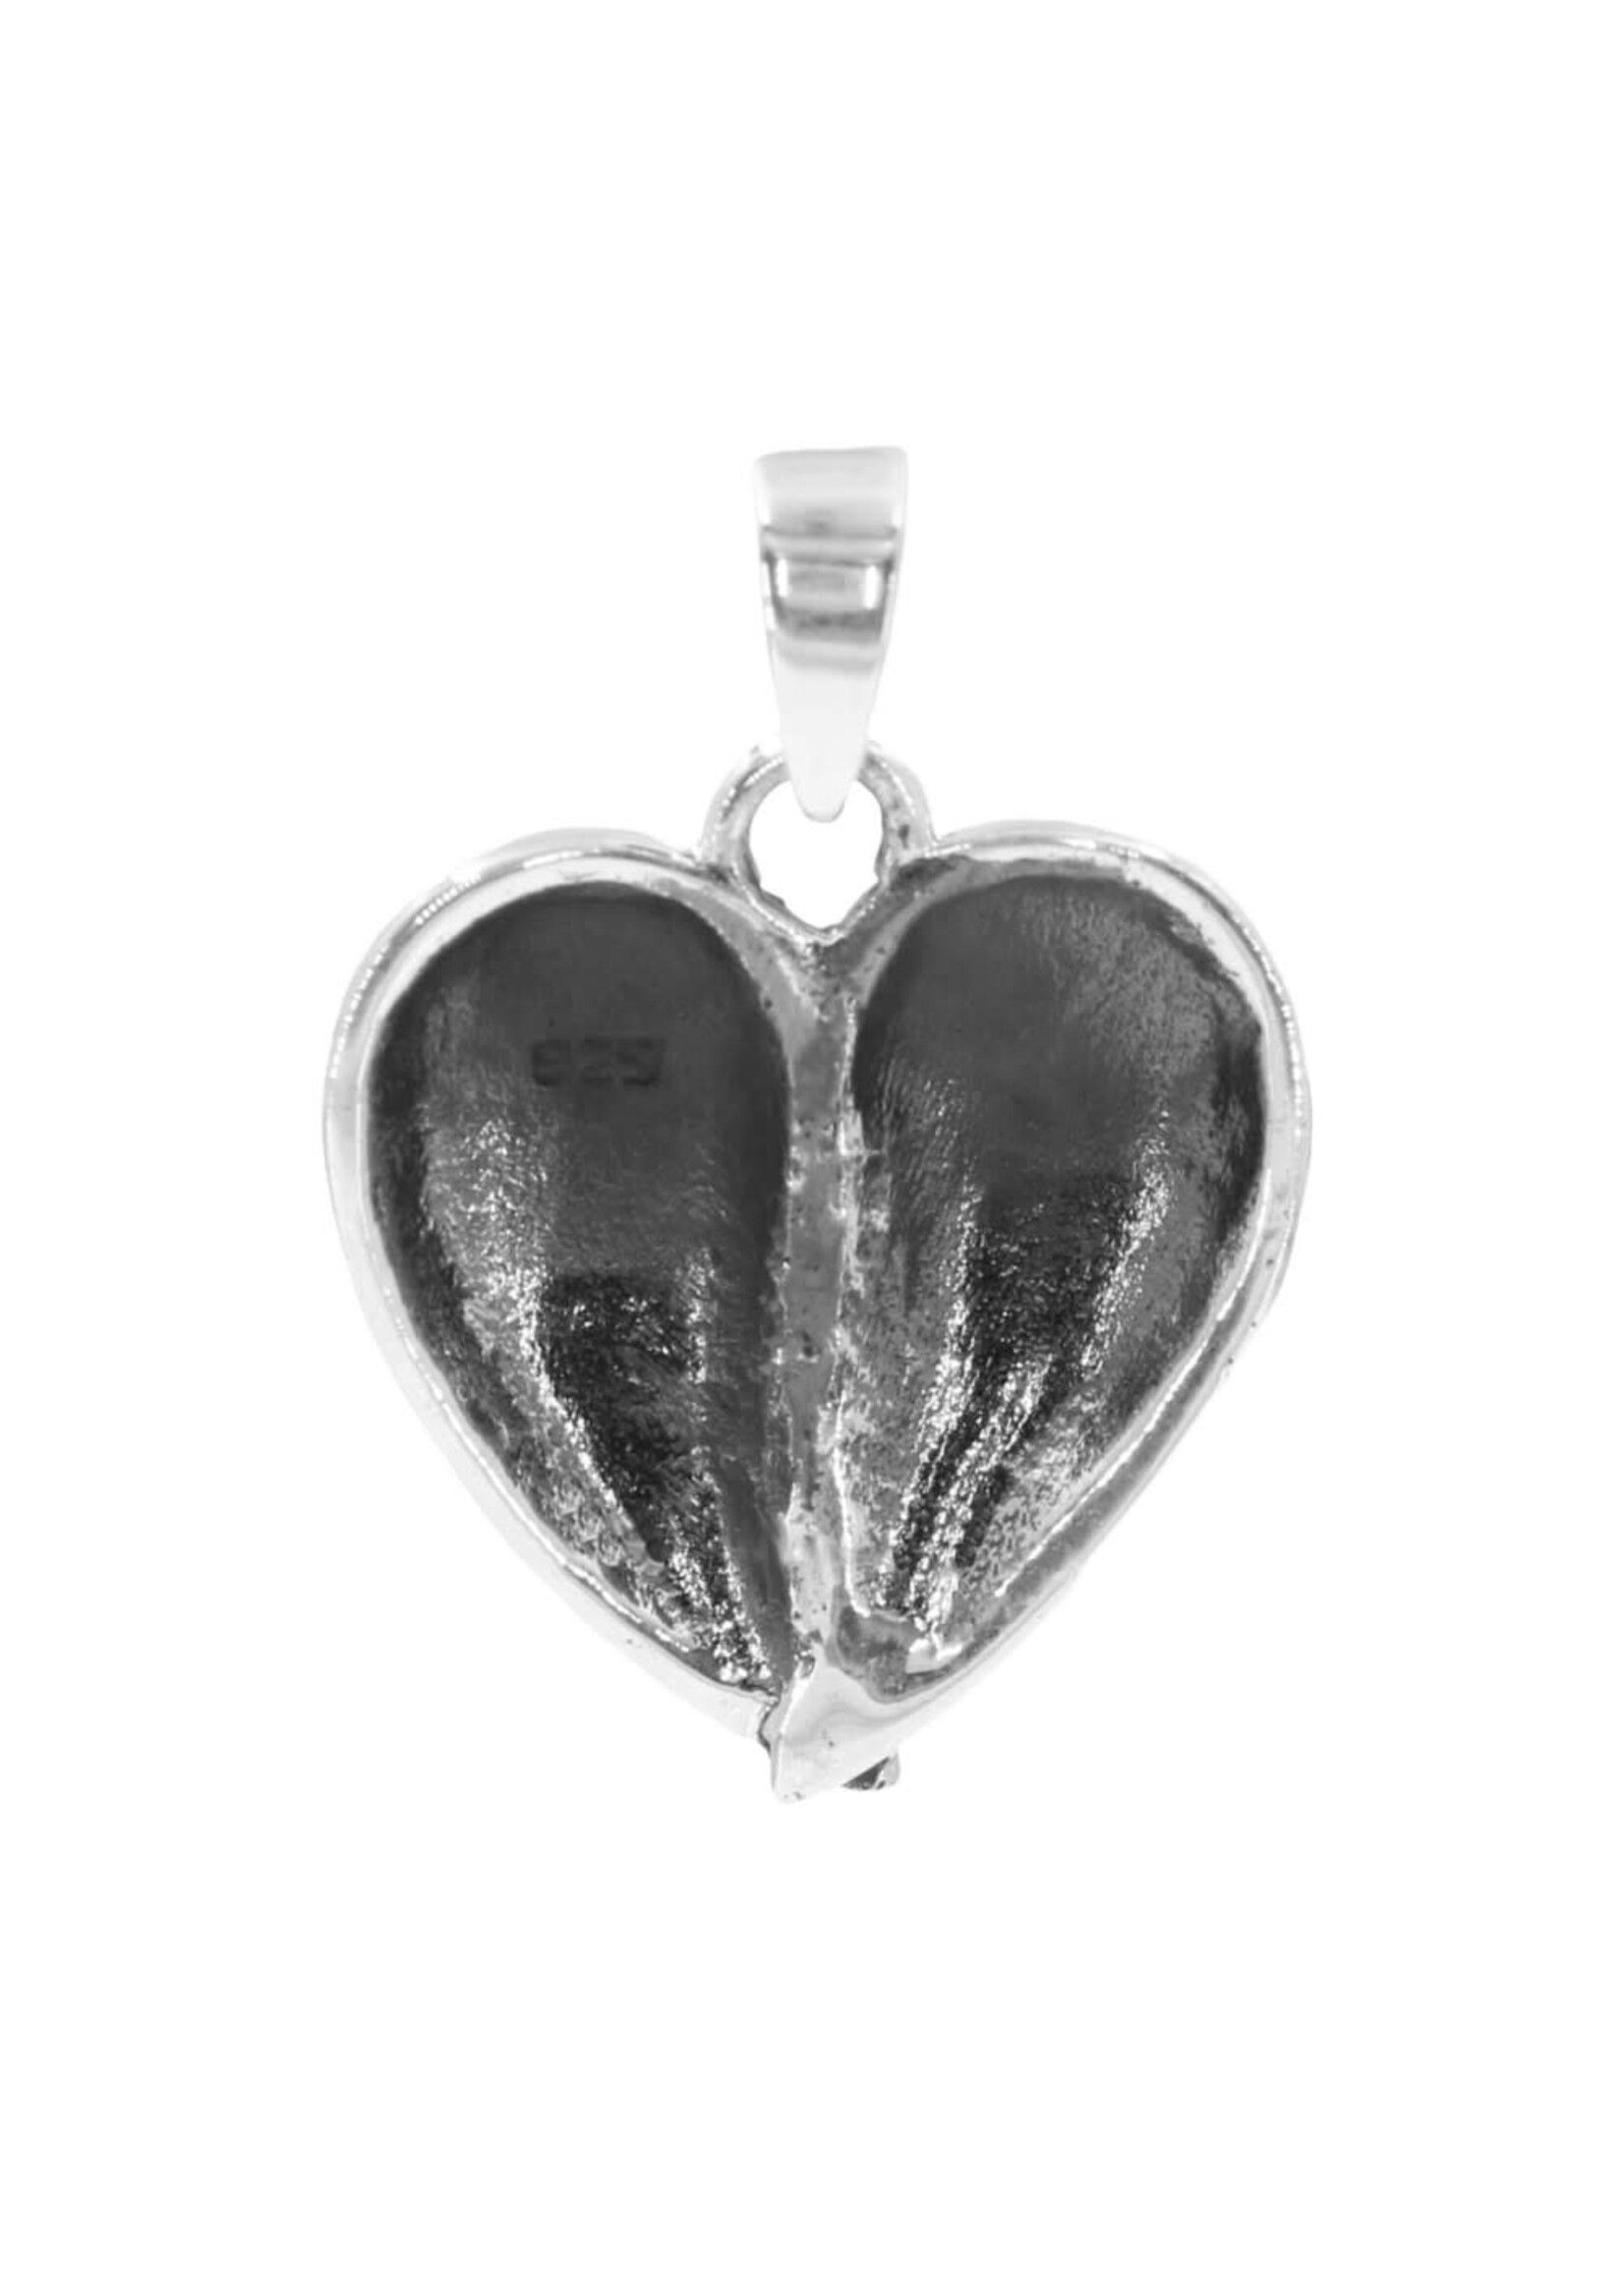 Trufili Vintage Inspired Heart Shaped Angel Wing Necklace